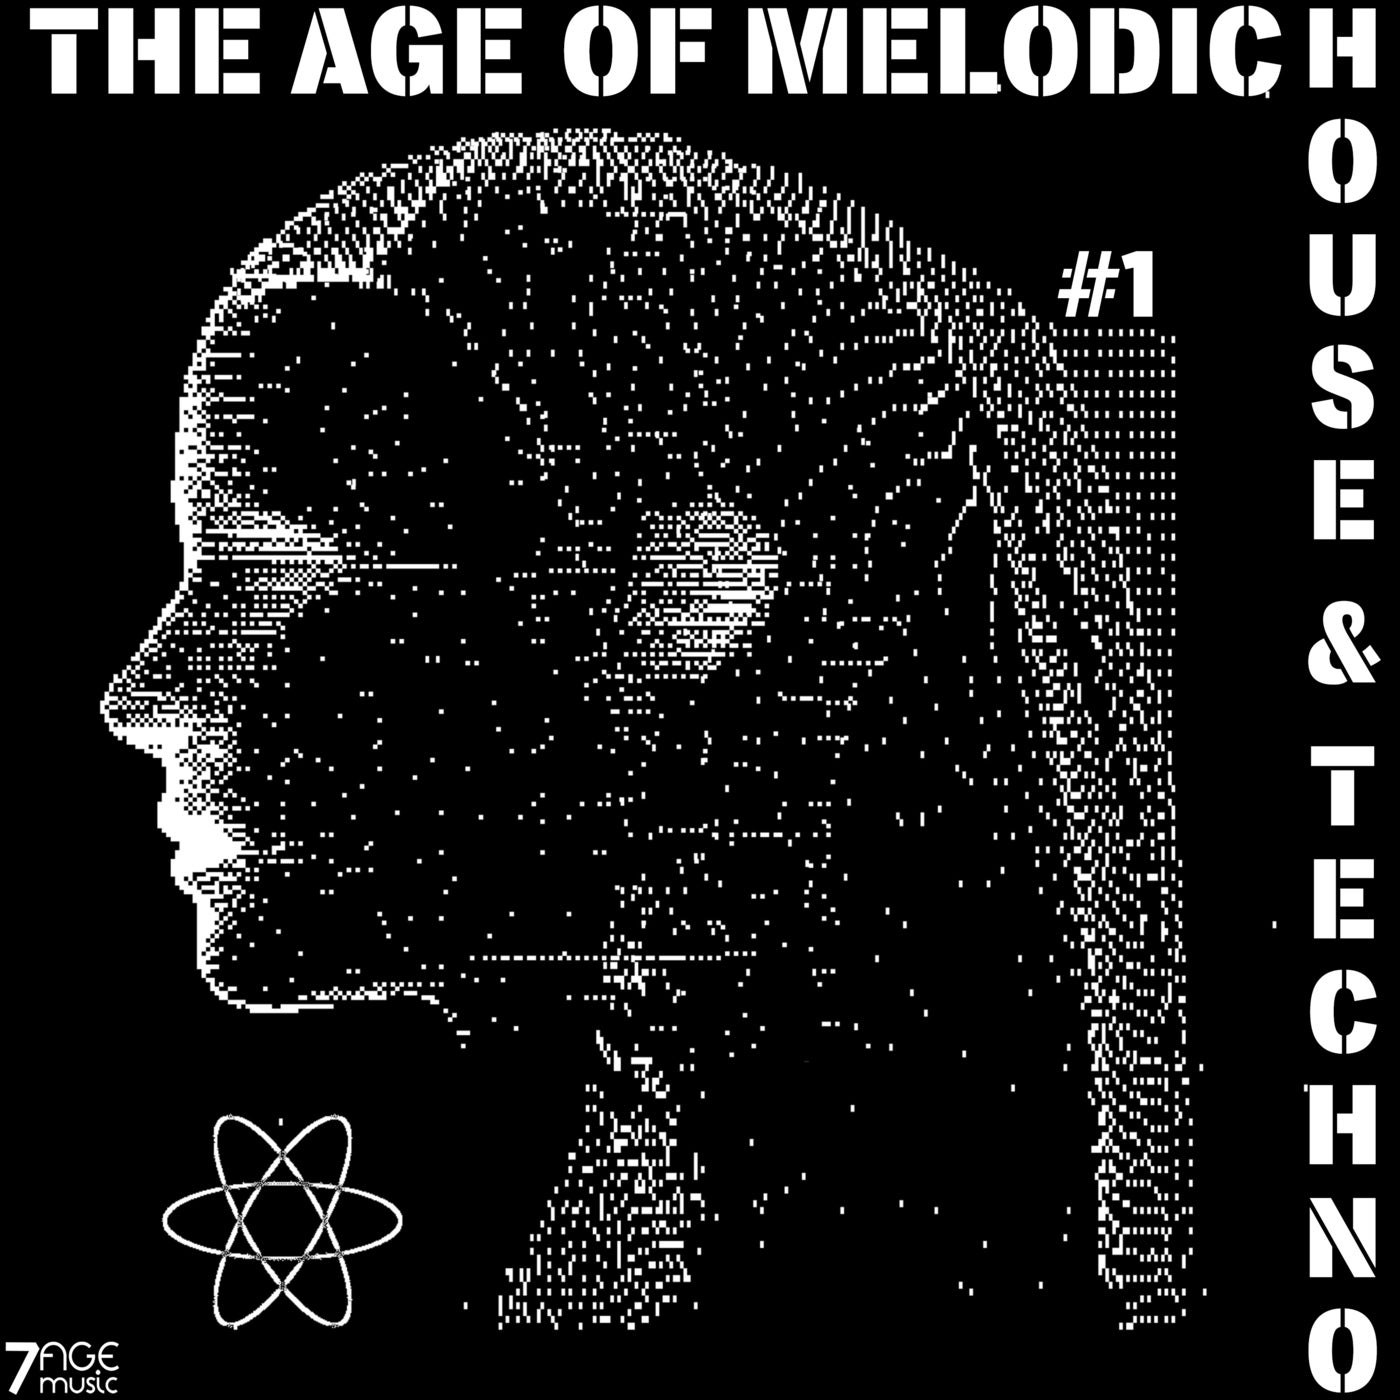 The Age of Melodic House & Techno, Vol. 1